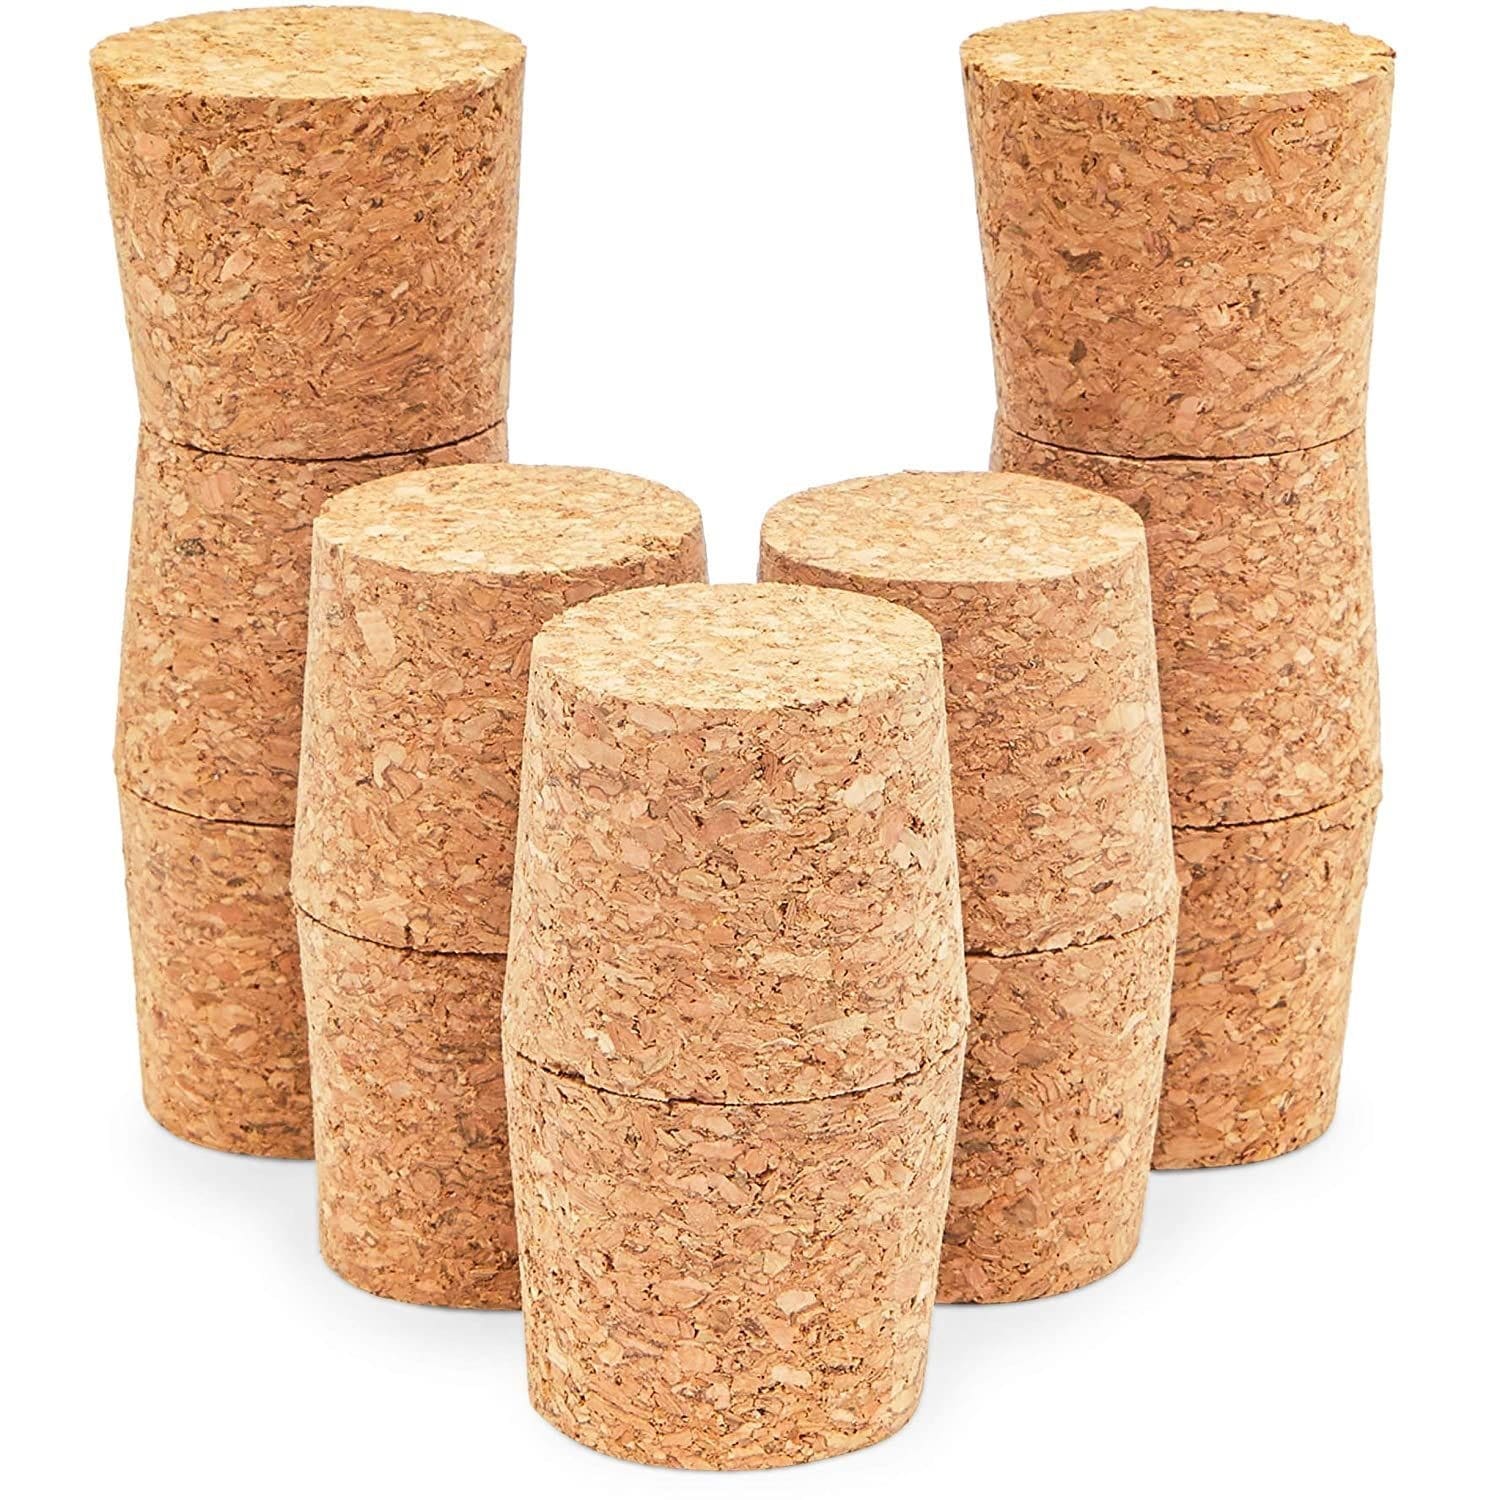 https://ak1.ostkcdn.com/images/products/is/images/direct/425c275f64e67f41478fc3fb0df7e407e8ca9984/12-Pack-Size-%2322-Tapered-Cork-Plugs-1.7%22%2C-Suitable-for-Most-Wine-and-Beer-Bottle.jpg